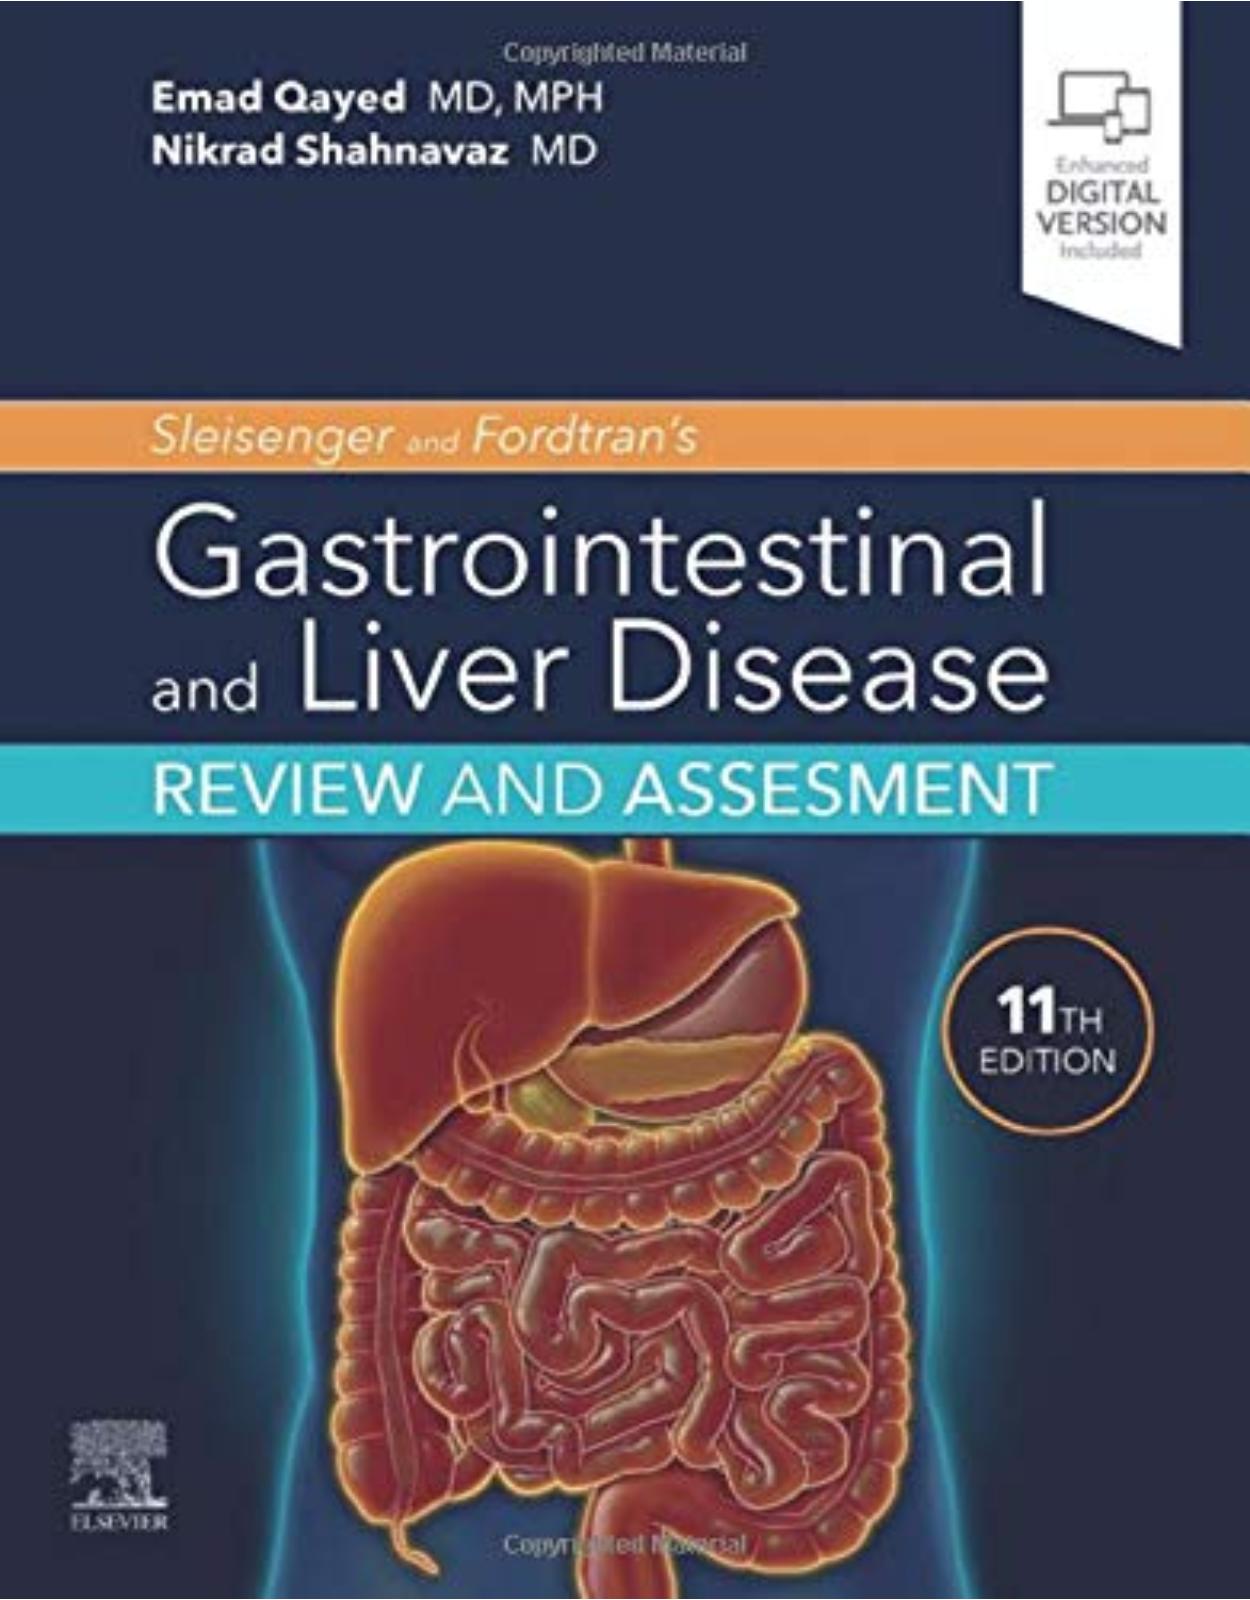 Sleisenger and Fordtran’s Gastrointestinal and Liver Disease Review and Assessment